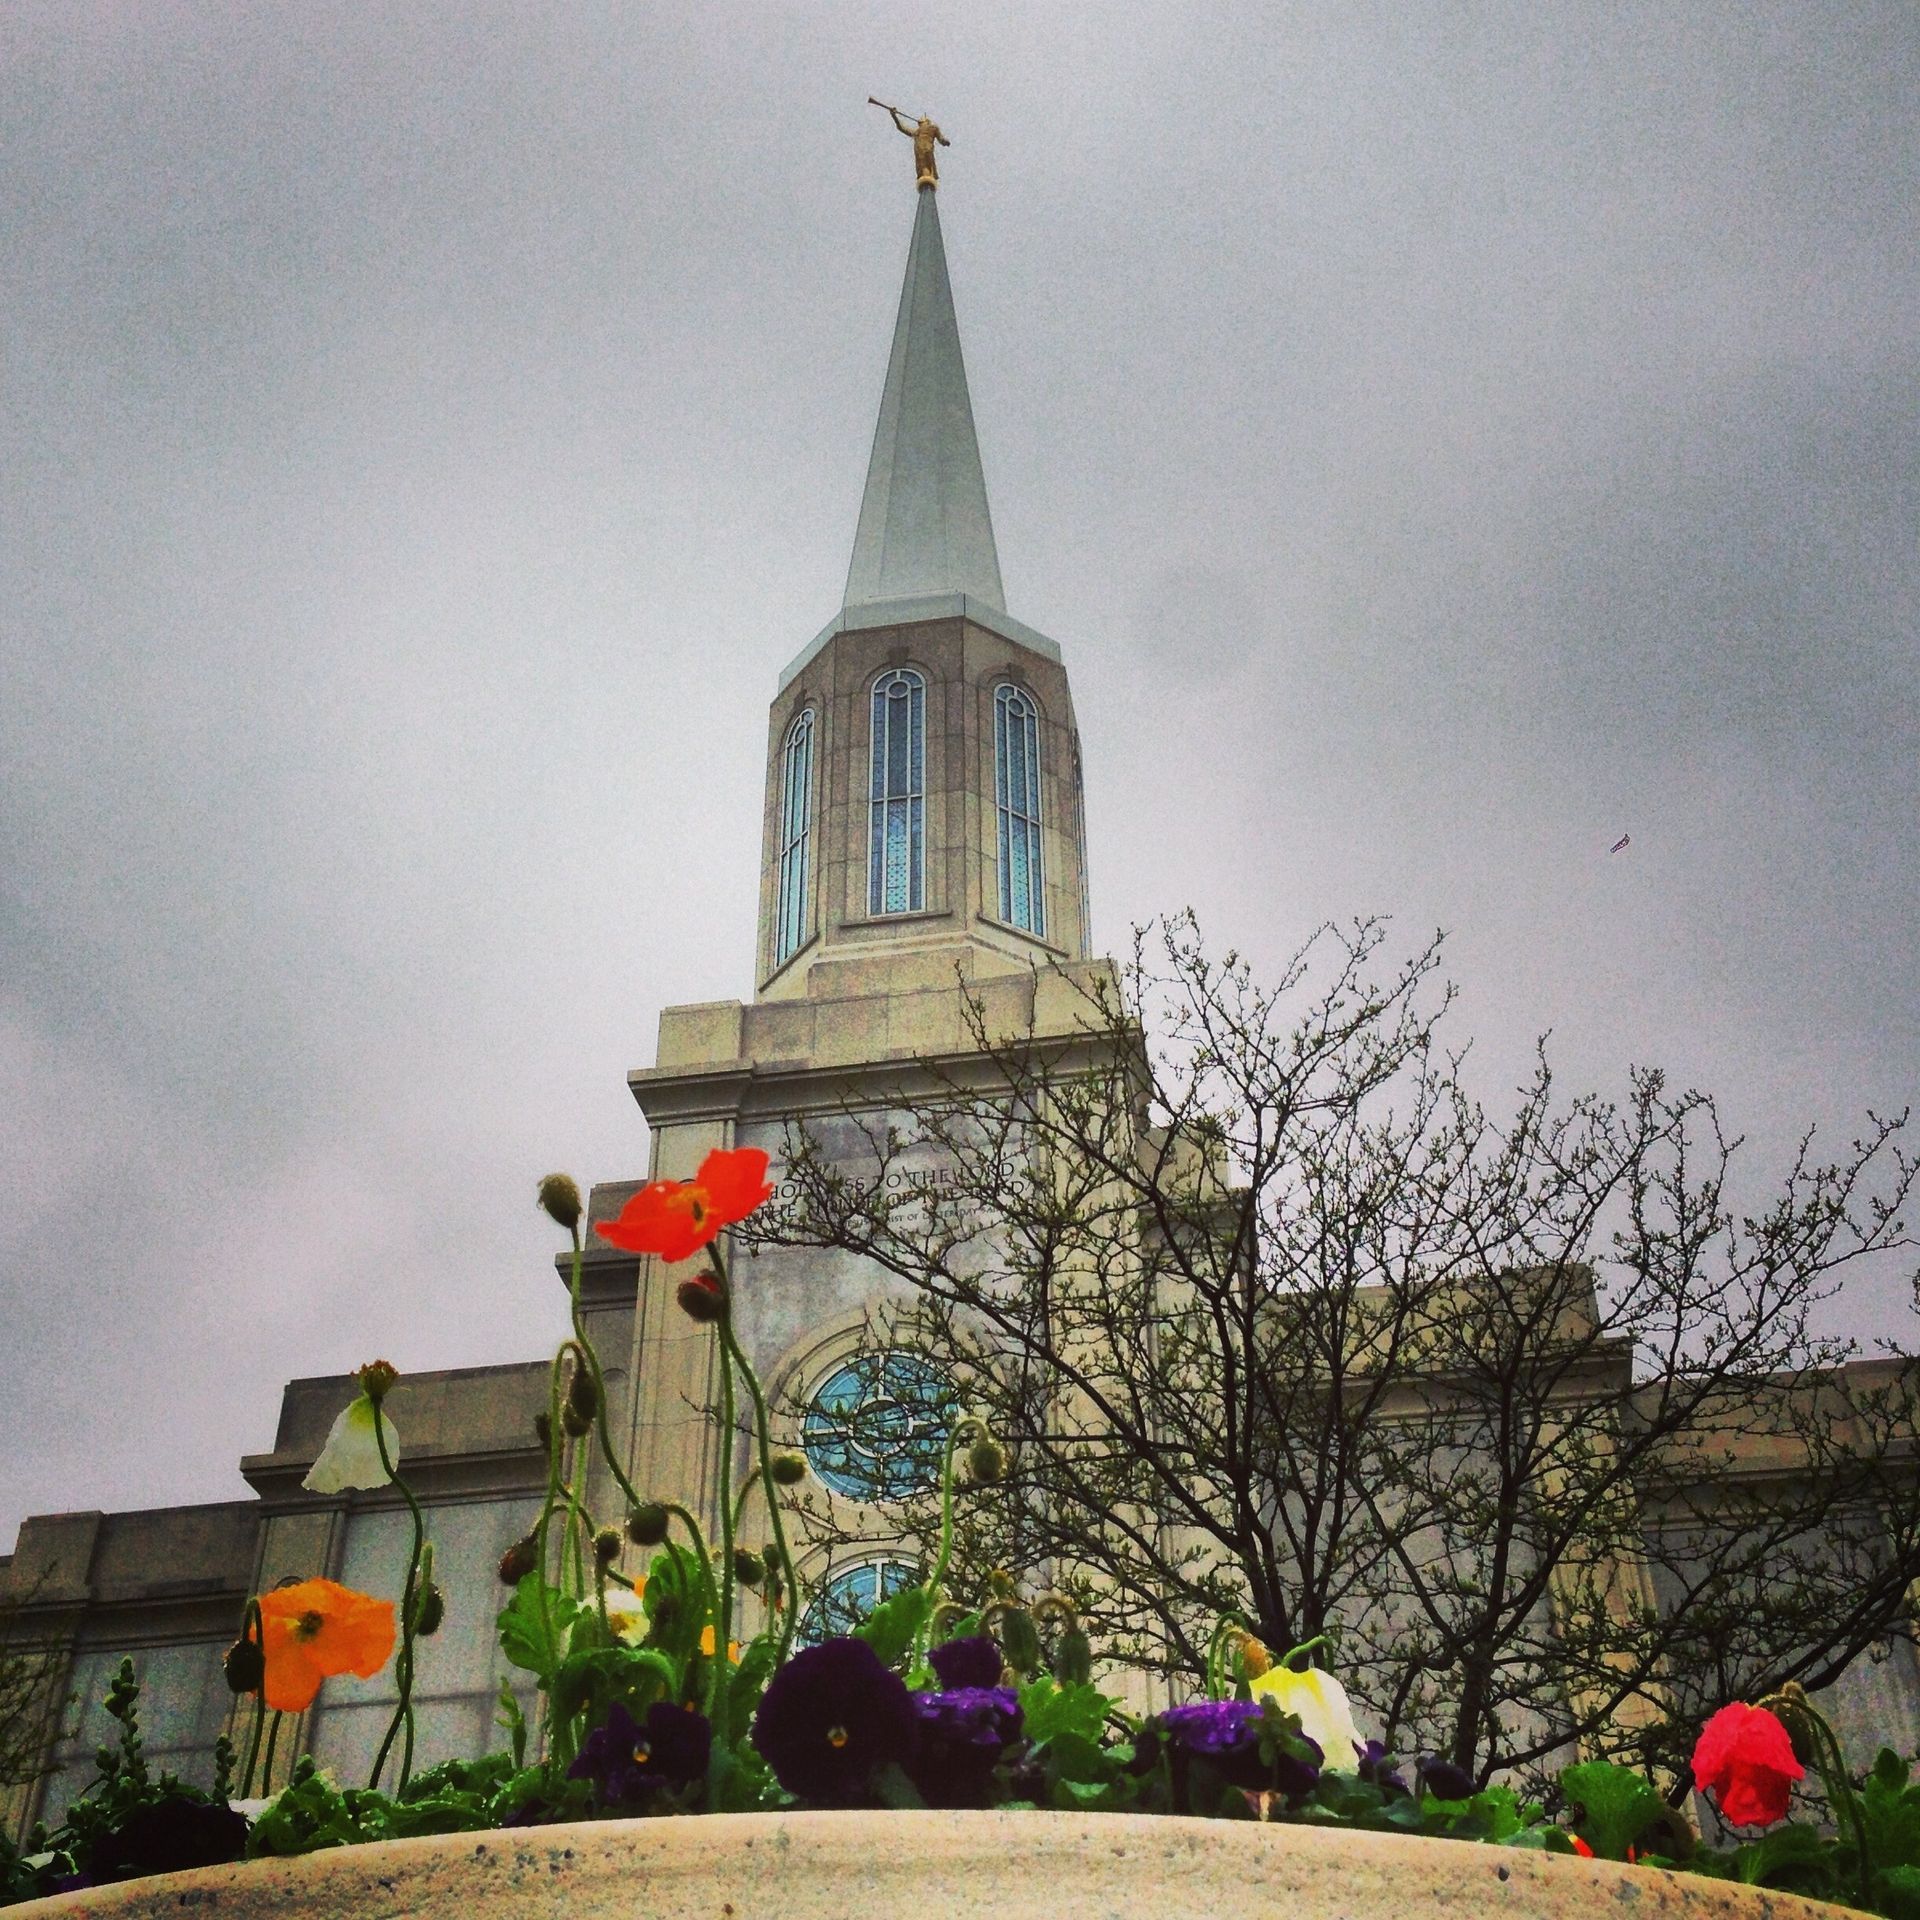 The St. Louis Missouri Temple during a storm, including the spire and scenery.